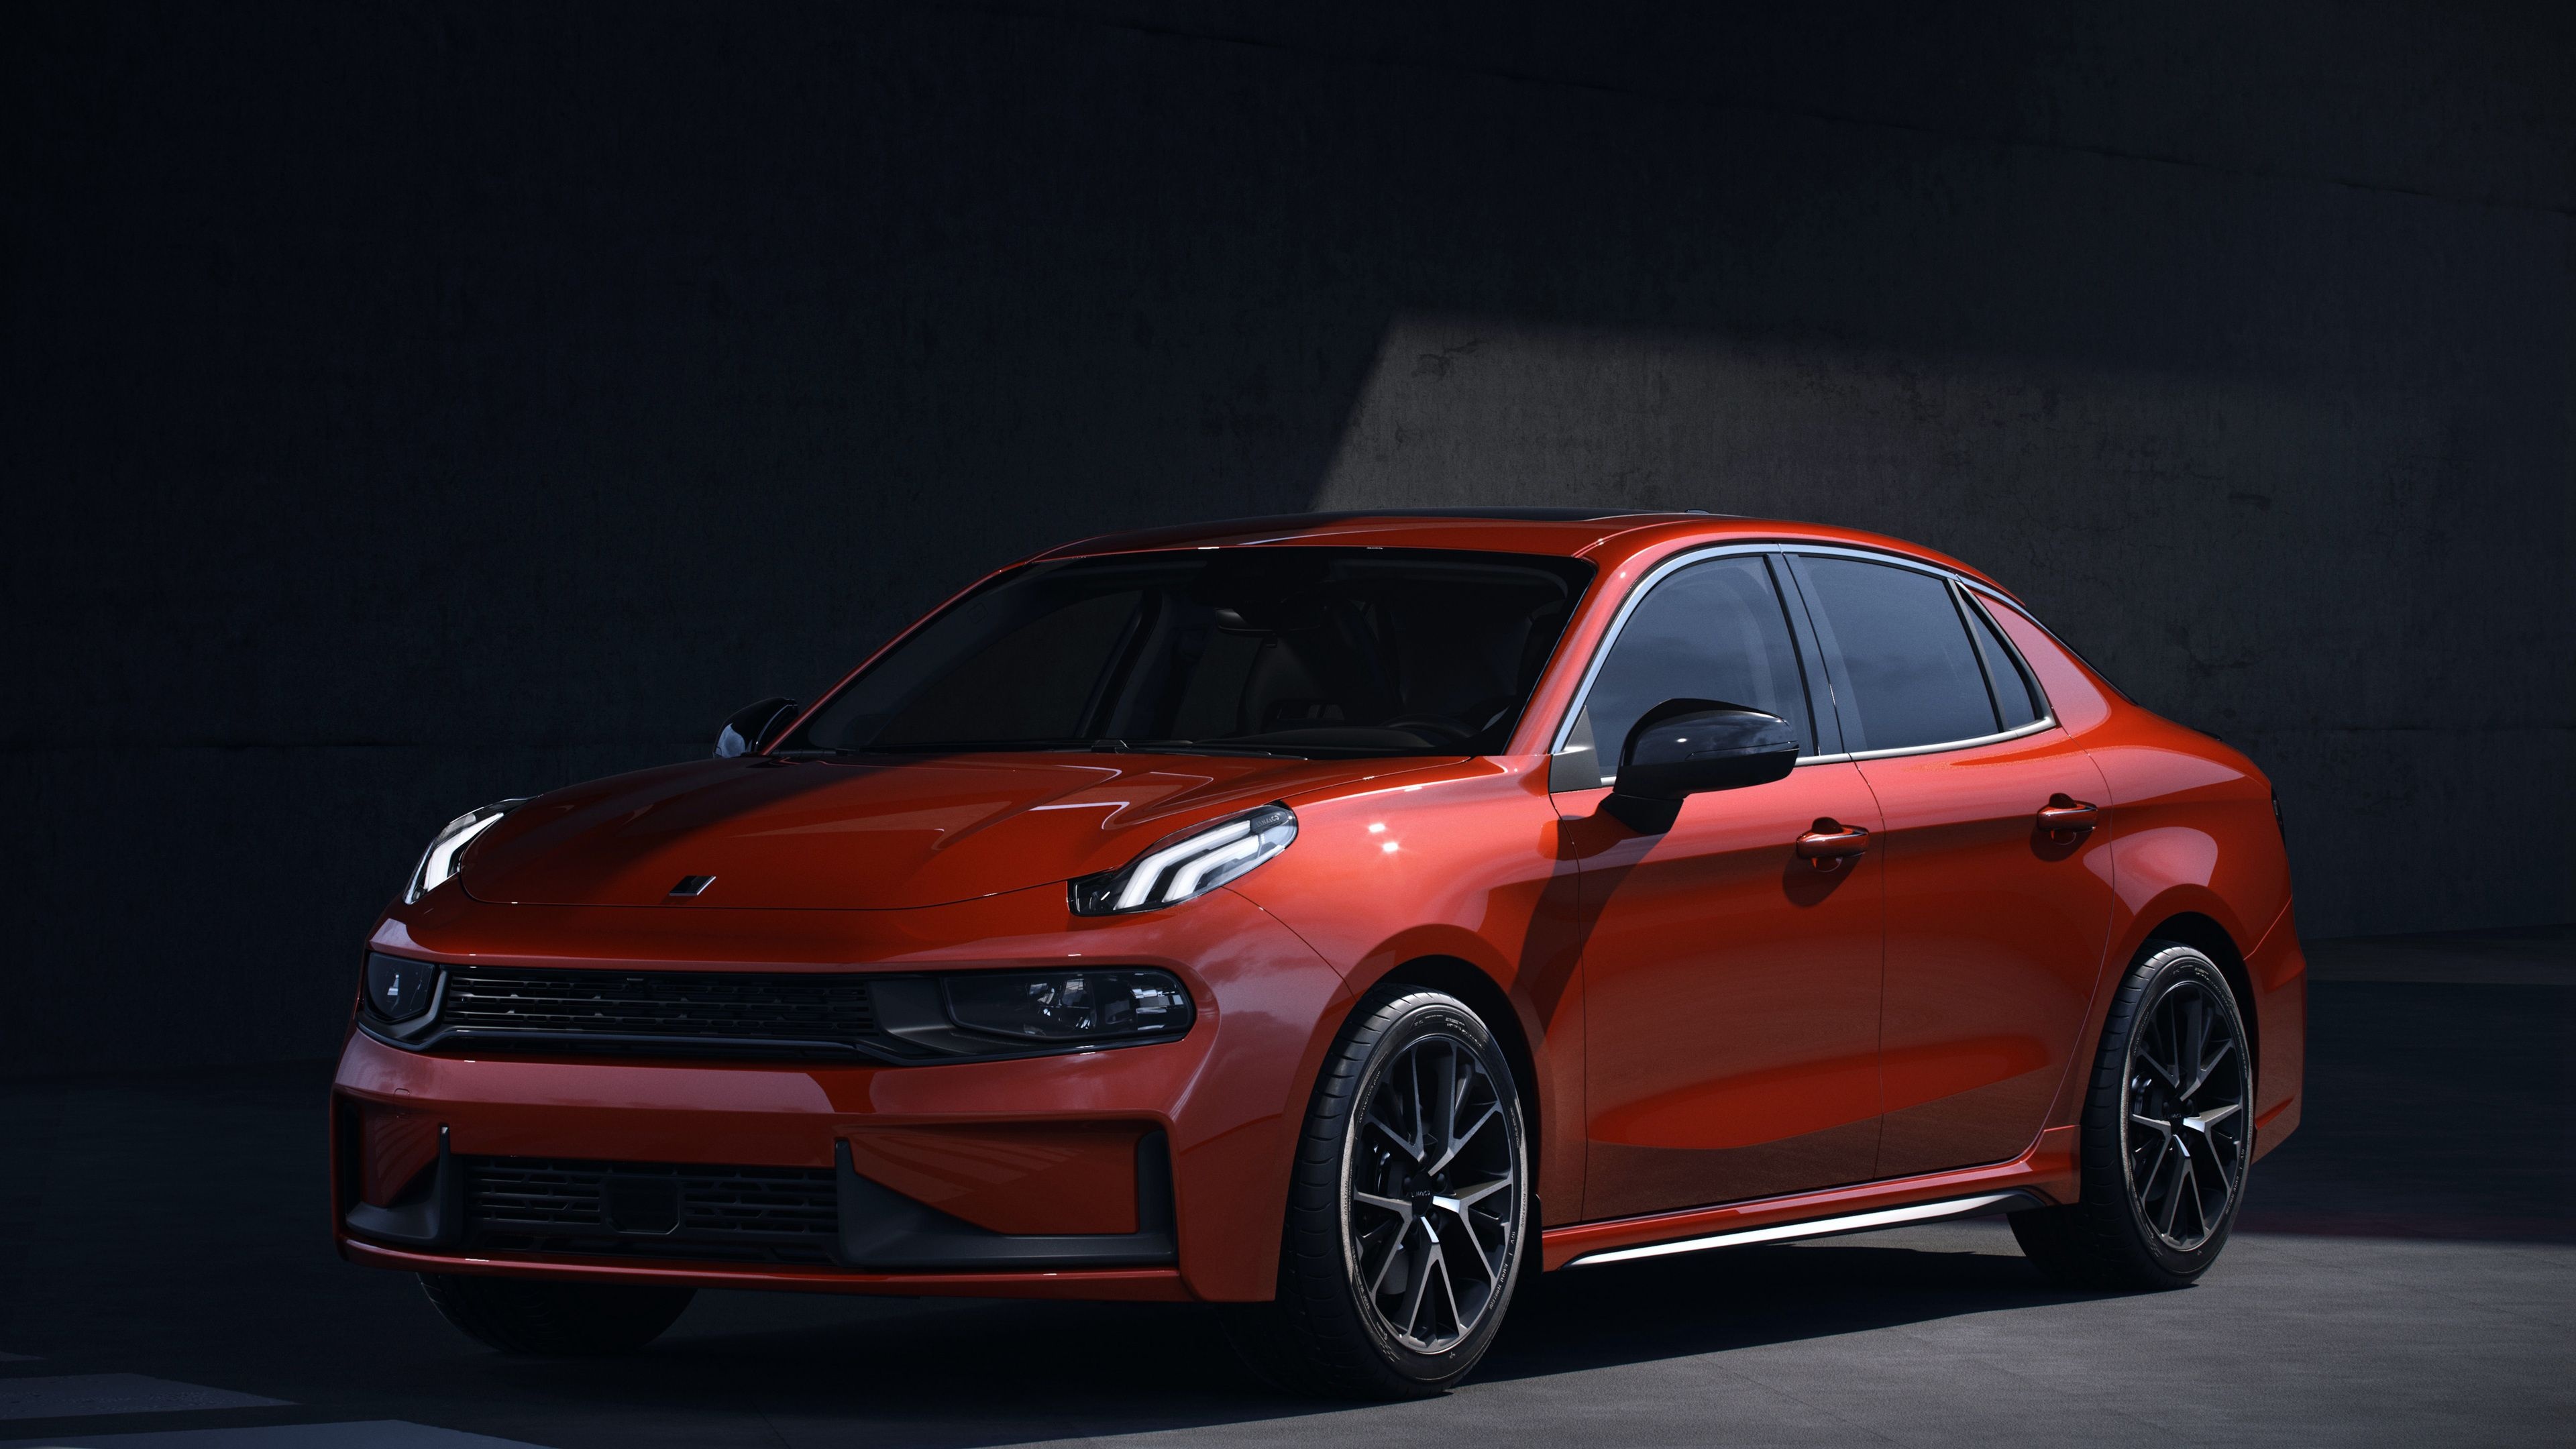 Lynk and Co, Cars collection, Automotive enthusiasts, Car enthusiasts, 3840x2160 4K Desktop